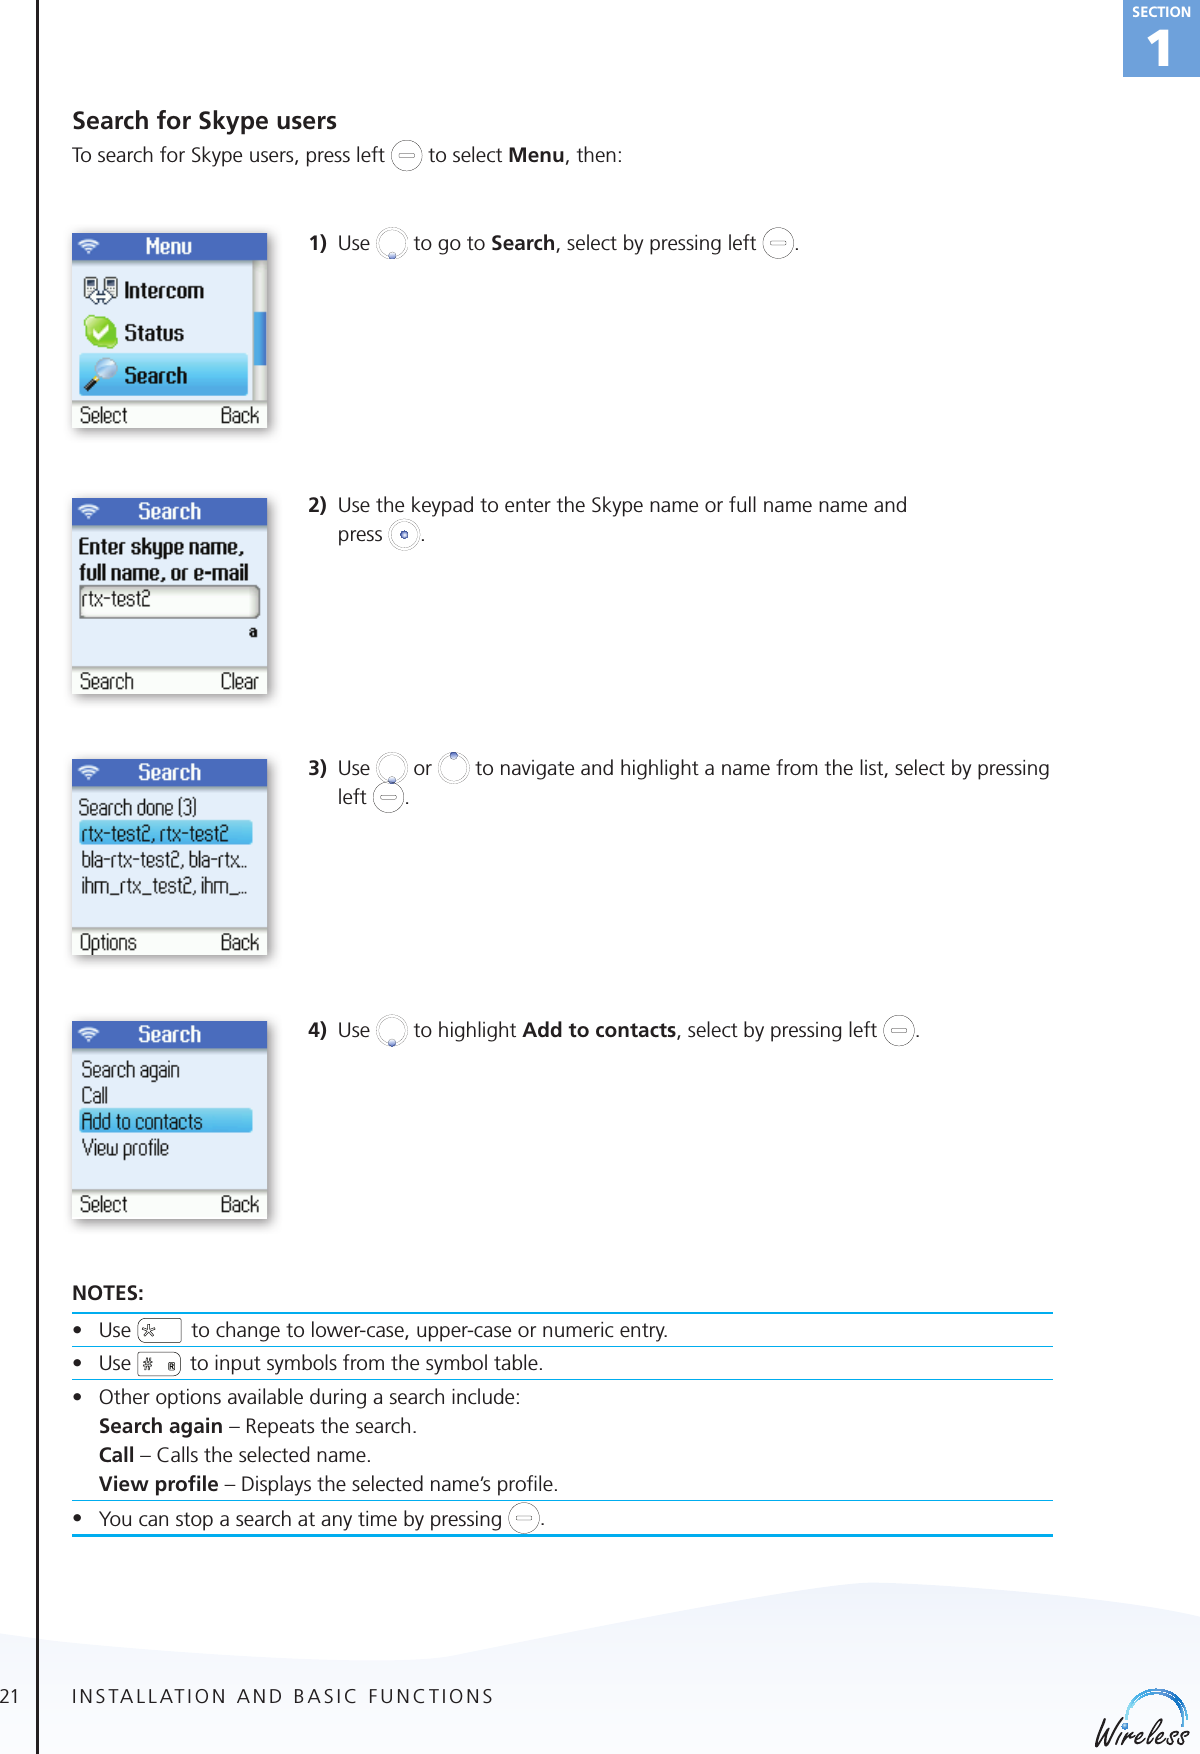 21english1SectionSearch for Skype usersTo search for Skype users, press left   to select Menu, then: 1) Use   to go to Search, select by pressing left  .2)  Use the keypad to enter the Skype name or full name name and  press  .3) Use   or   to navigate and highlight a name from the list, select by pressing left  . 4) Use   to highlight Add to contacts, select by pressing left  .NOTES:• Use  to change to lower-case, upper-case or numeric entry.• Use   to input symbols from the symbol table.• Otheroptionsavailableduringasearchinclude:   Search again – Repeats the search.   Call – Calls the selected name.   View proﬁle – Displays the selected name’s proﬁle.• You can stop a search at any time by pressing  .INSTALLATION AND BASIC FUNCTIONS